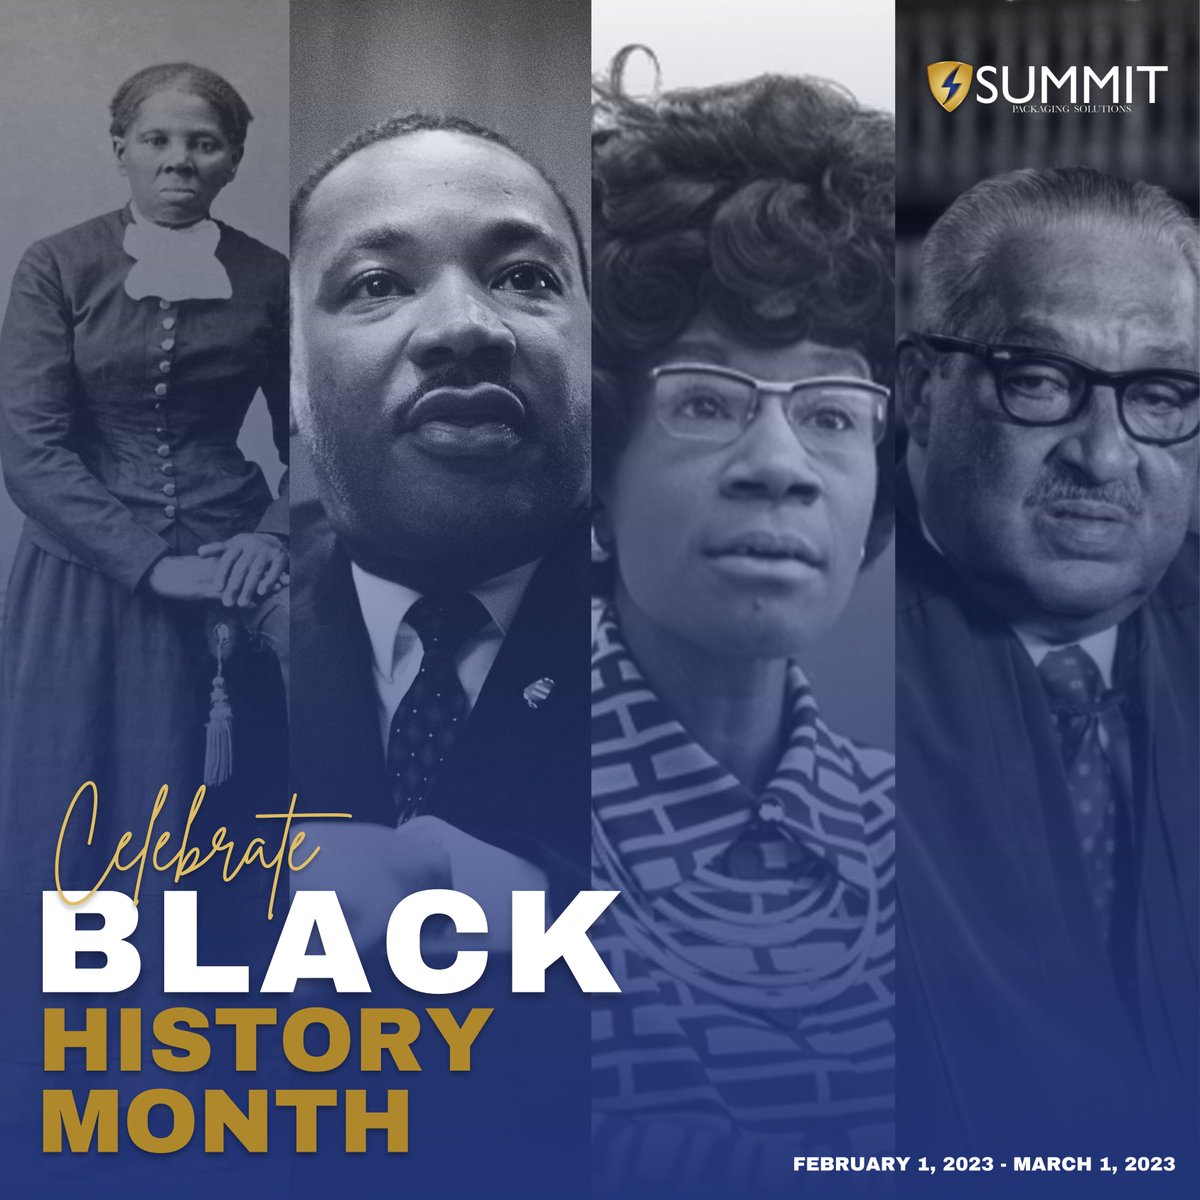 Black History Month is a great opportunity to take time to reflect on the amazing contributions African Americans have made to our society. Let's use this month to celebrate their achievements and make sure their legacies are honored and remembered. #BlackHistoryMonth